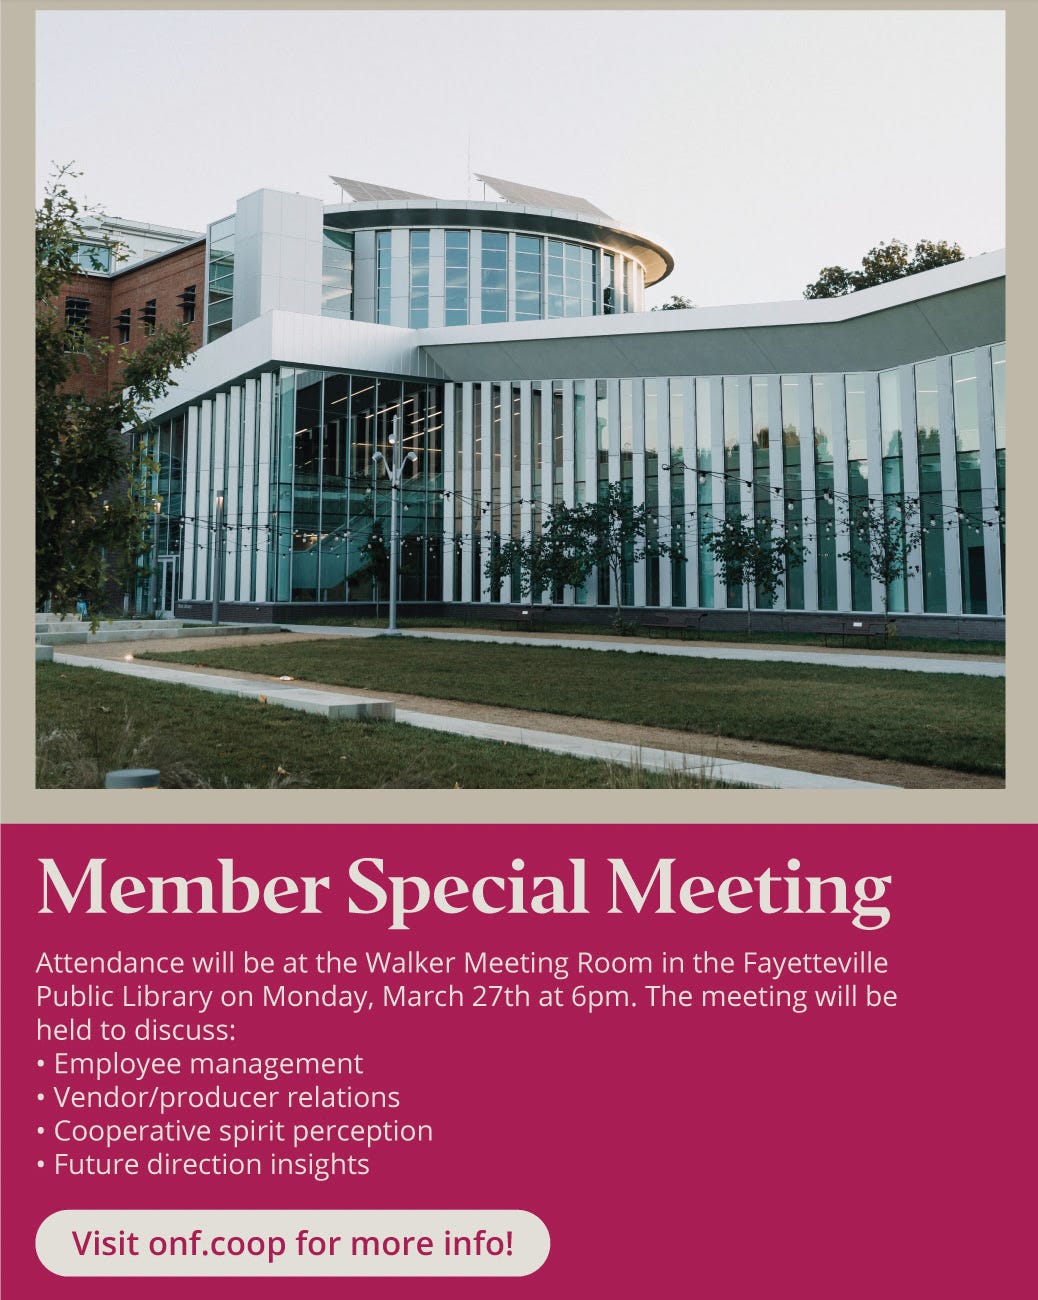 Image text: Member Special Meeting  Attendance will be at the Walker Meeting Room in the Fayetteville Public Library on Monday, March 27th at 6pm. The meeting will be held to discuss:  Employee management  Vendor/producer relations  Cooperative spirit perception  Future direction insights  Visit onf.coop for more info!